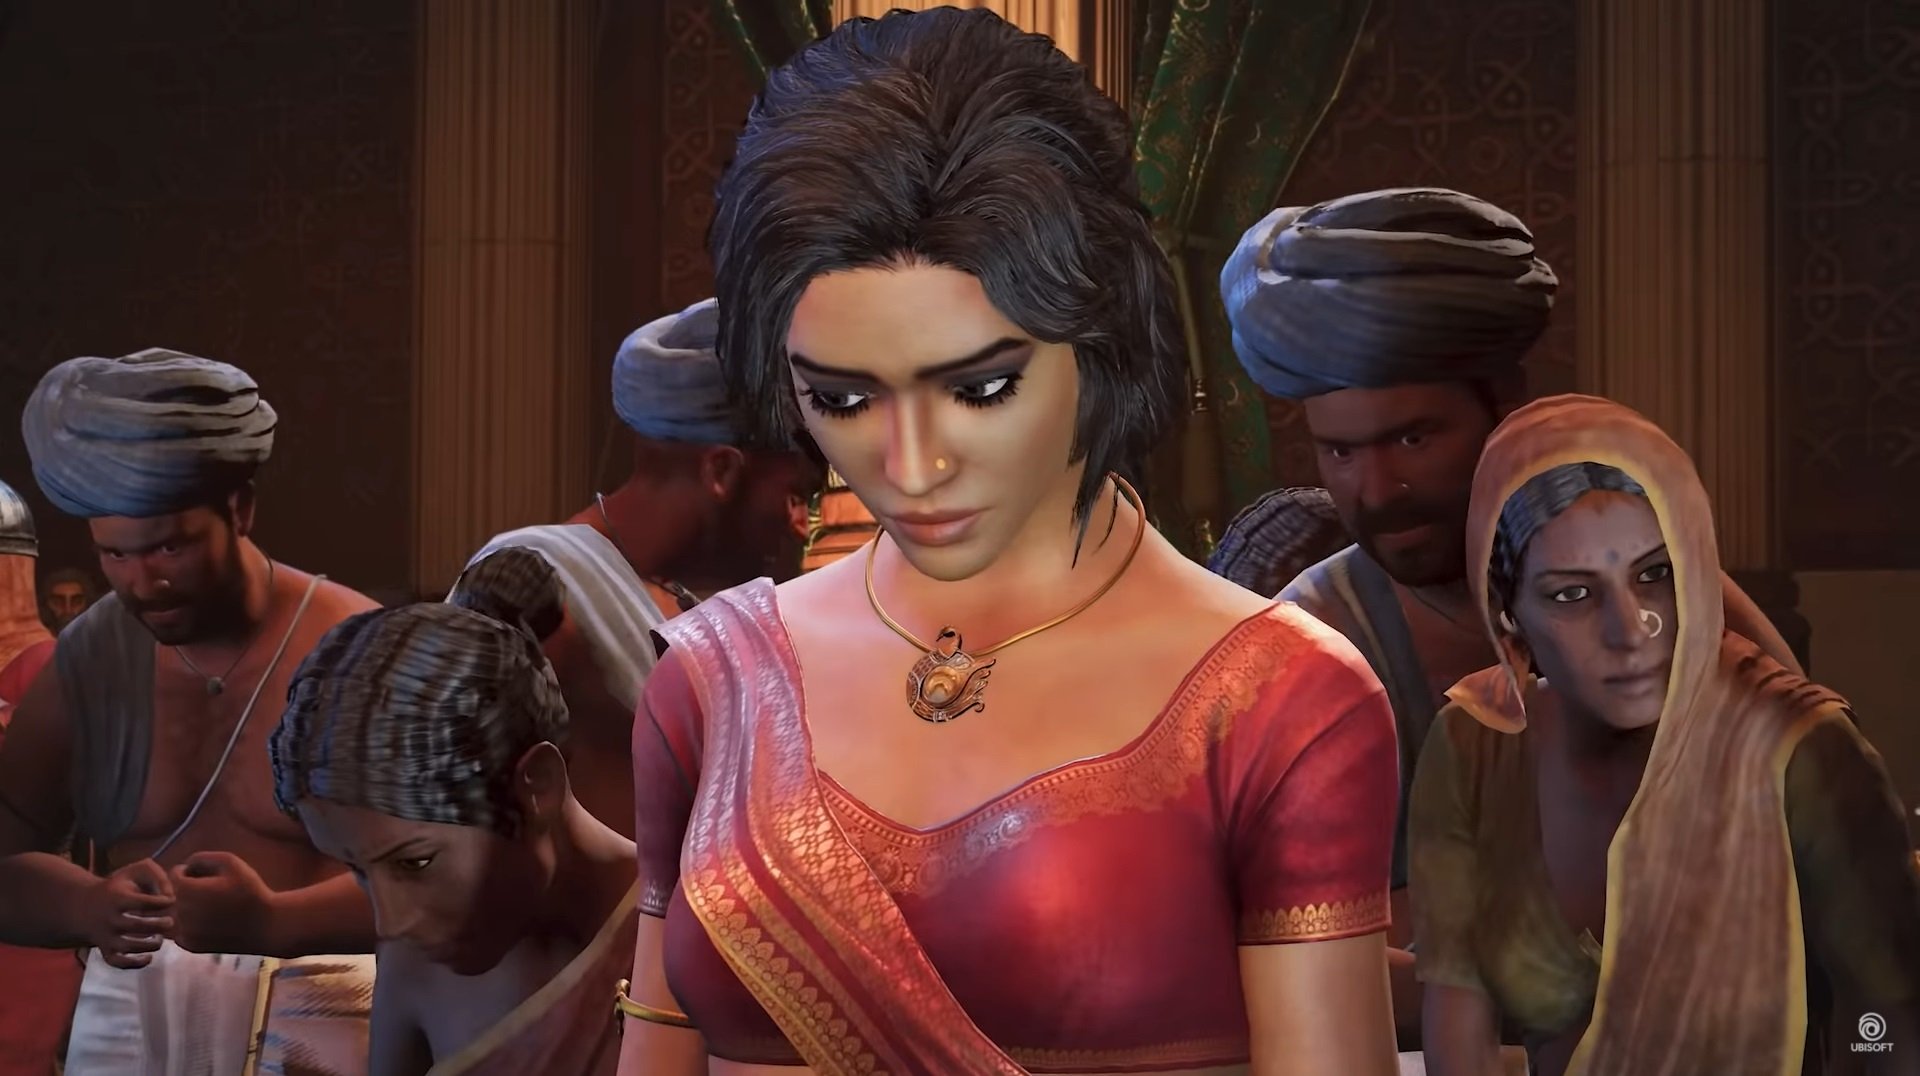 The original studio behind Prince of Persia: The Sands of Time is now in  charge of its remake